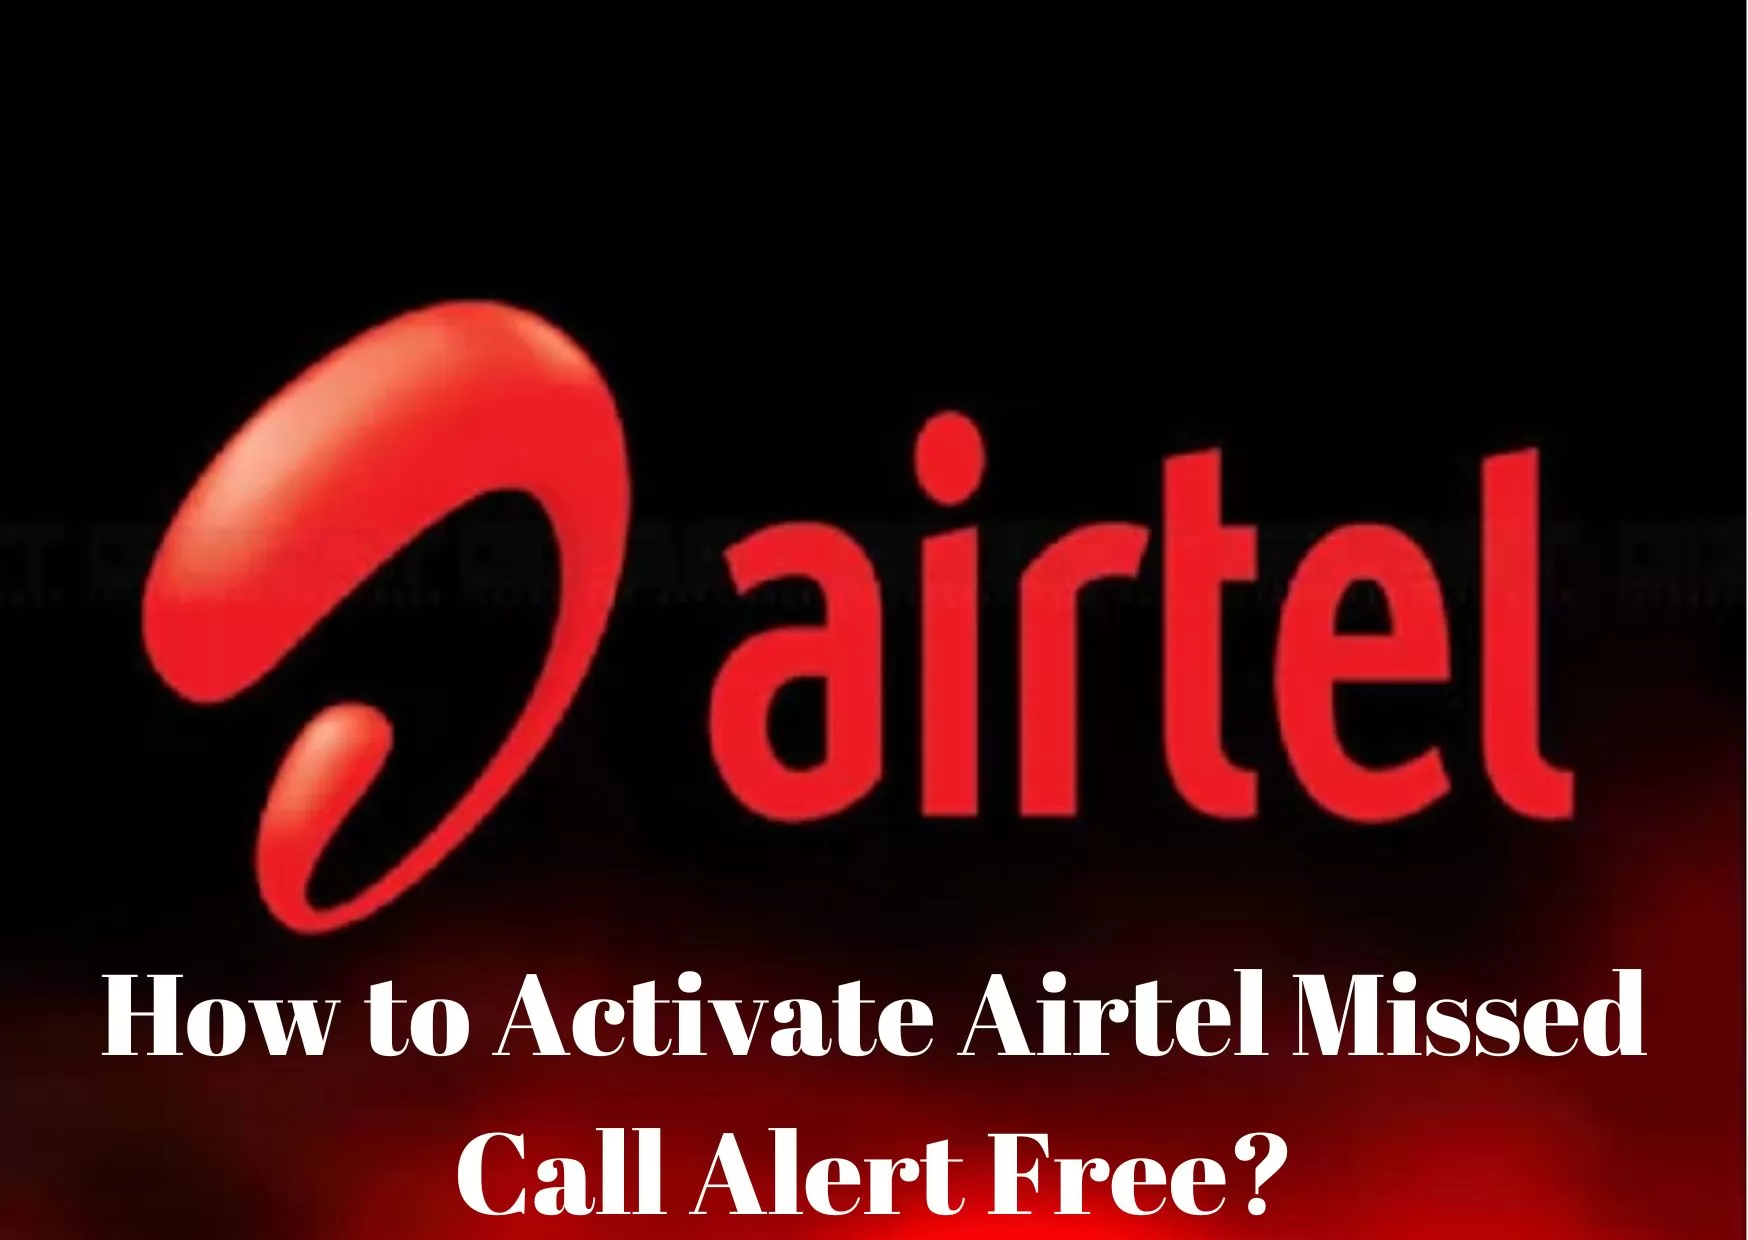 How to Activate Airtel Missed Call Alert Free